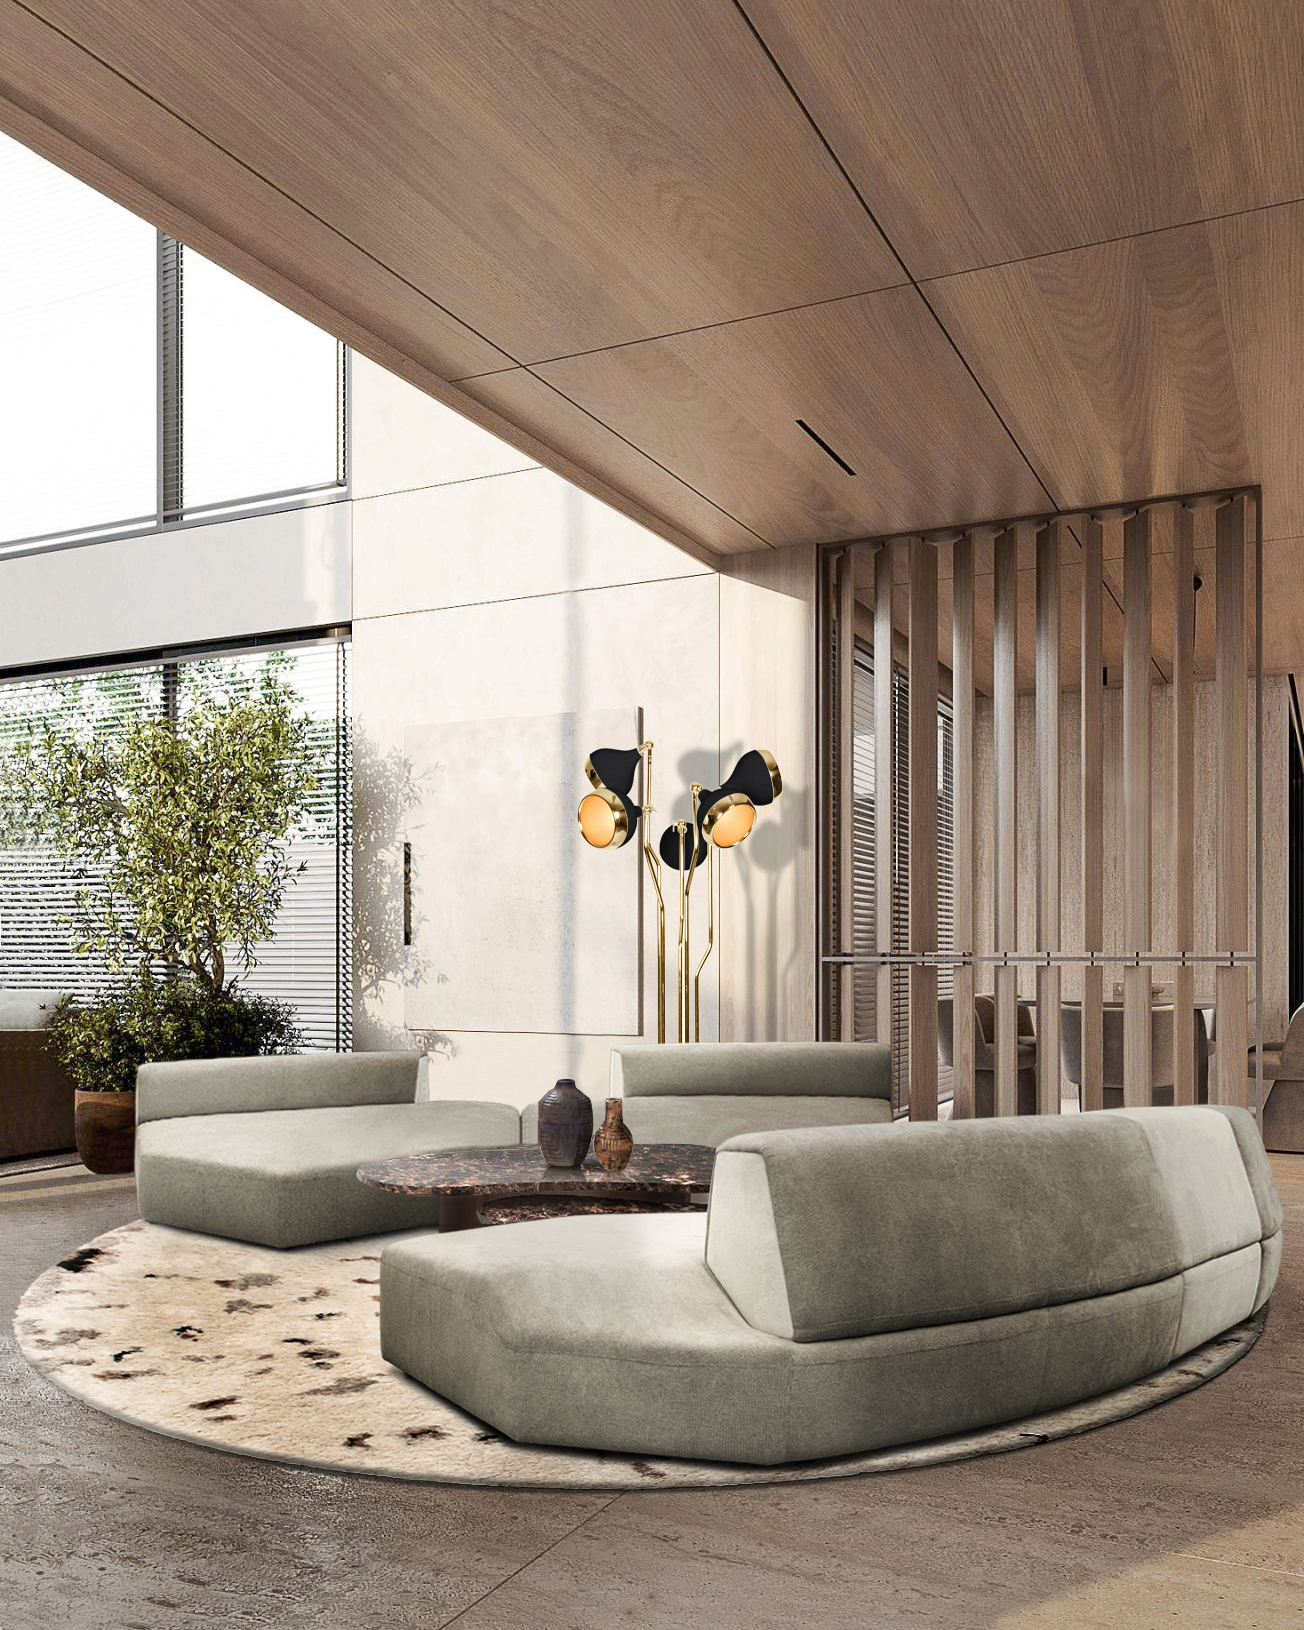  A Living Room Oasis with Wood Ceilings and a Beautiful Modular Sofa  Inspirations Caffe Latte Home